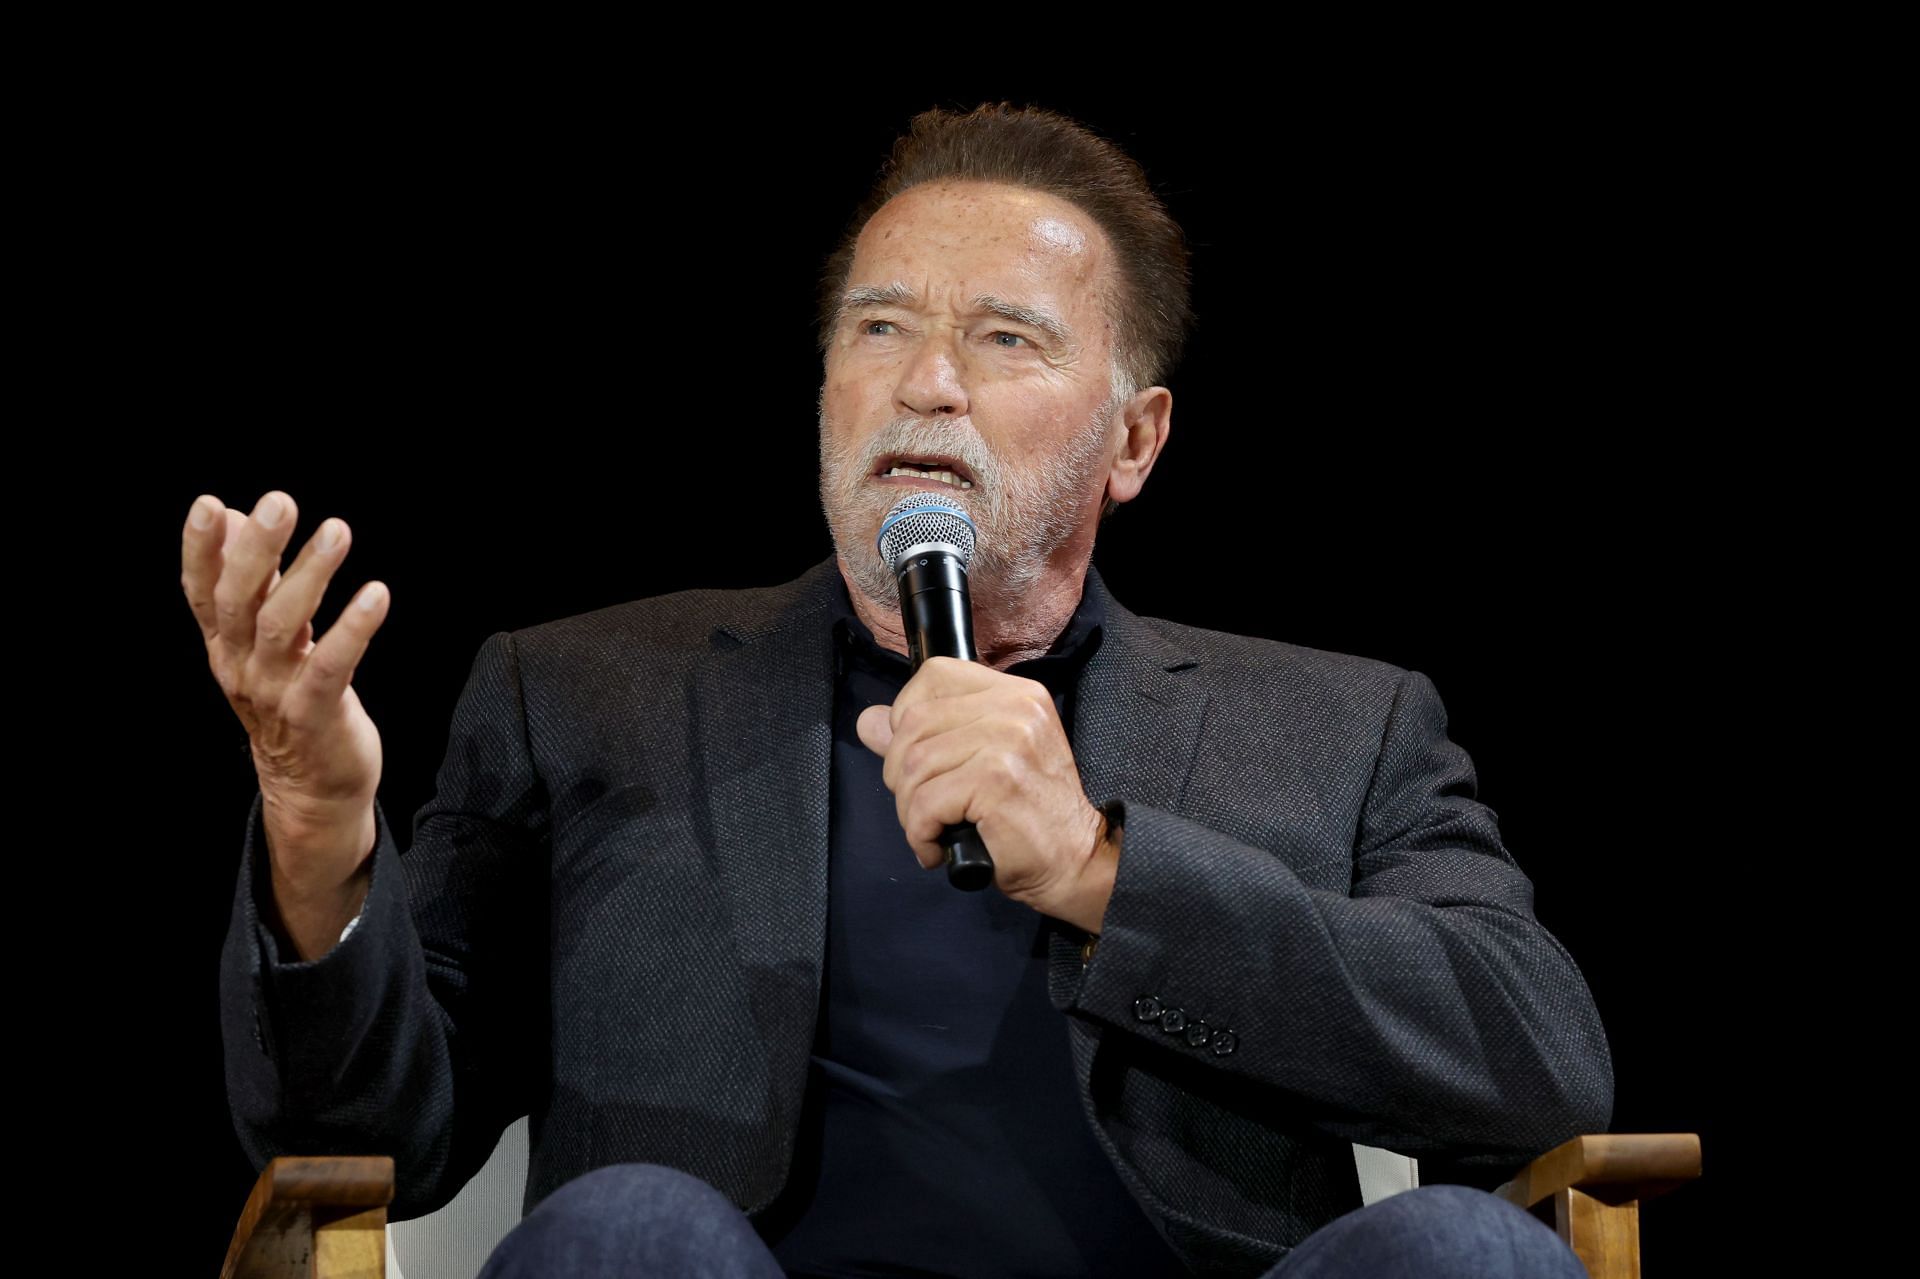 Arnold at The Wall Street Journal&#039;s Tech Live Conference. (Image via Getty/Phillip Faraone)